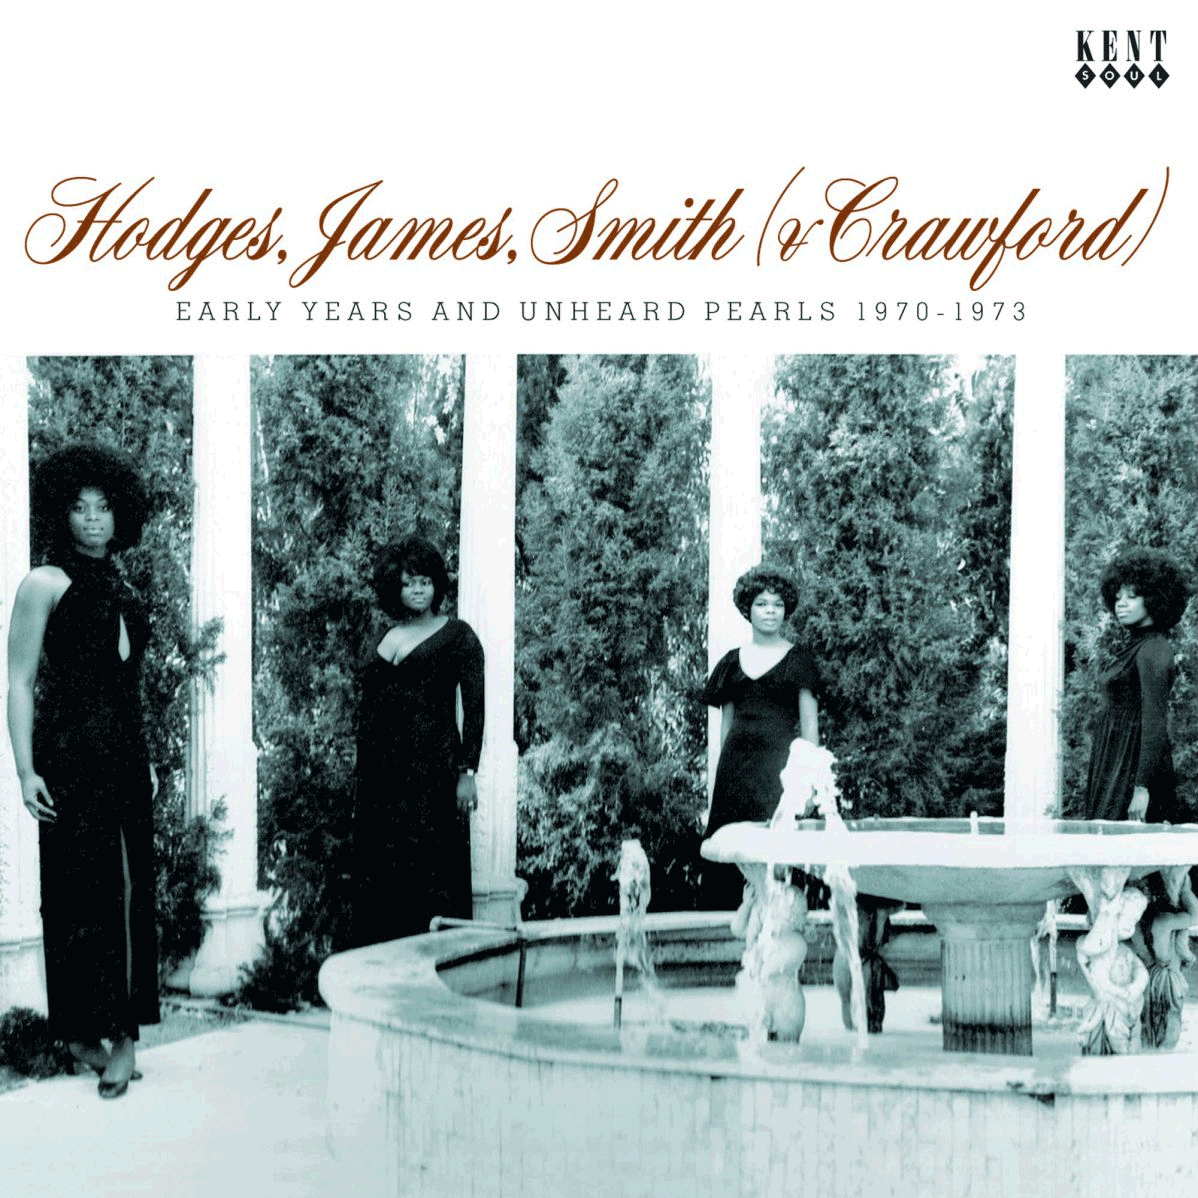 Early Years And Unheard Pearls 1970-1973 Hodges, James, Smith & Crawford - Kent Records CD